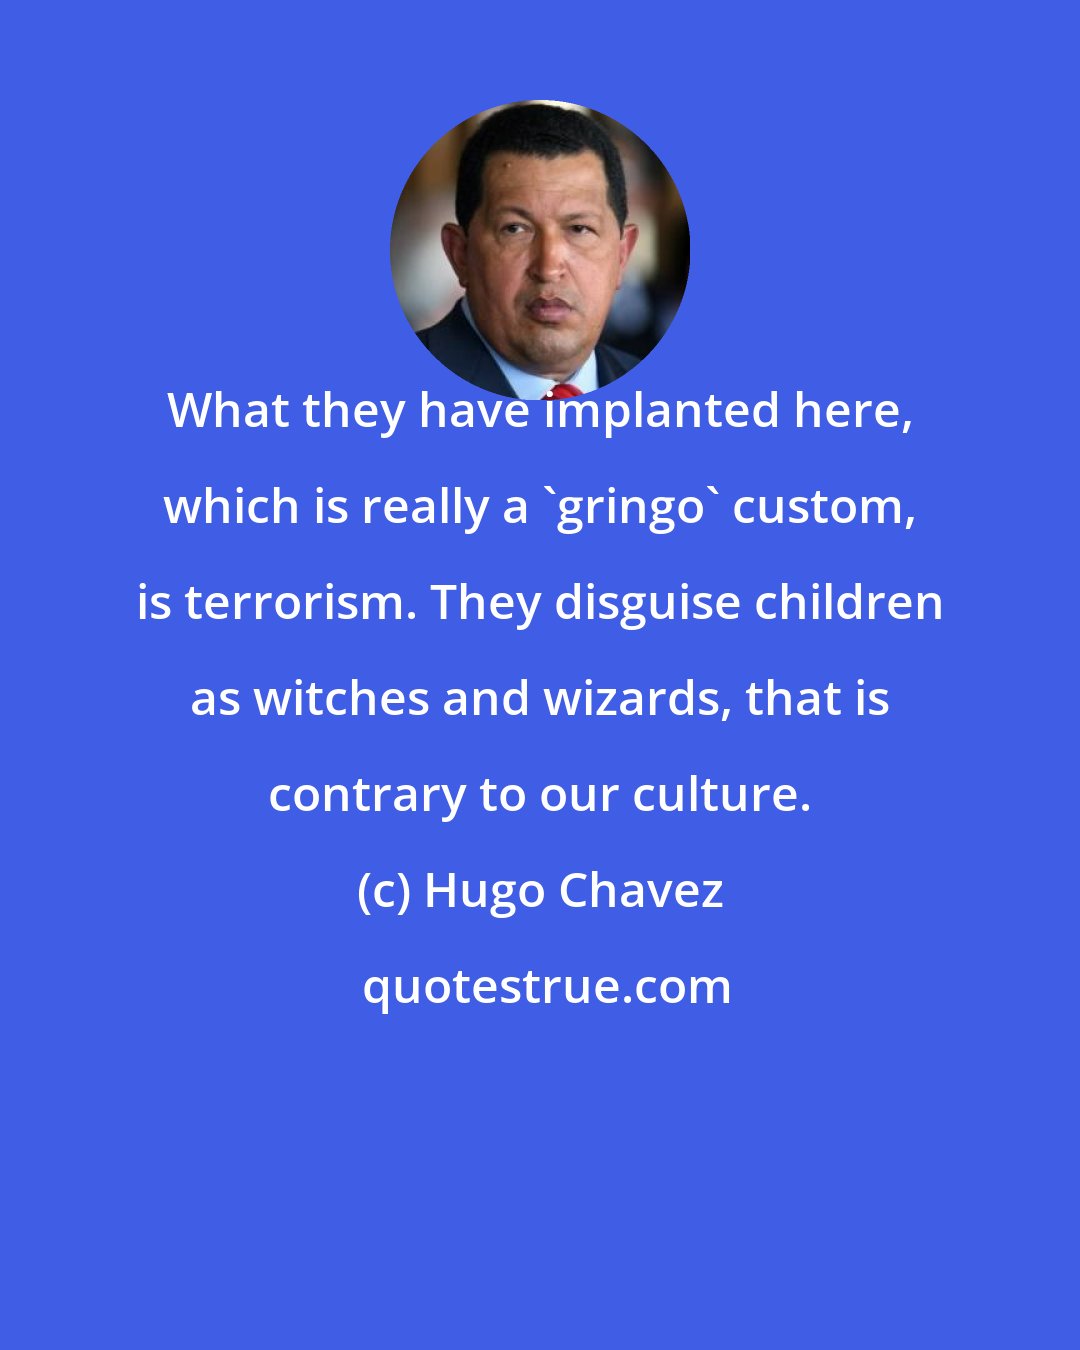 Hugo Chavez: What they have implanted here, which is really a 'gringo' custom, is terrorism. They disguise children as witches and wizards, that is contrary to our culture.